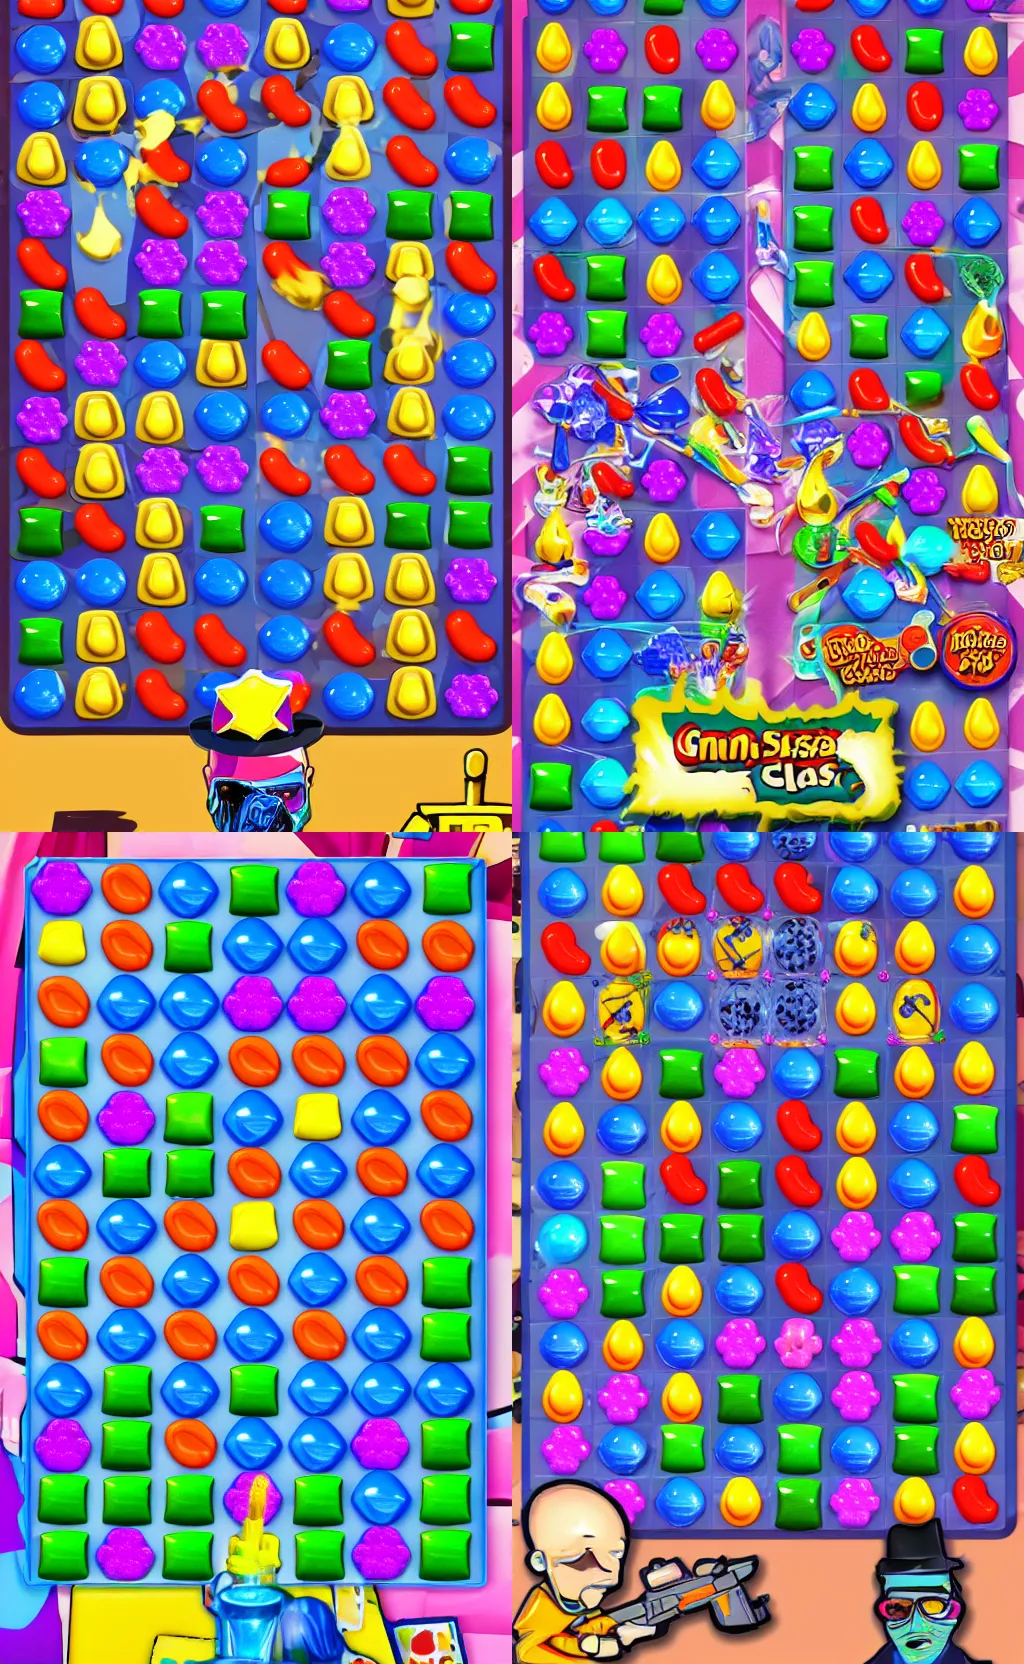 Prompt: jesse pinkman match 3 game with guns bongs and blue crystals candy crush by king in game screenshot